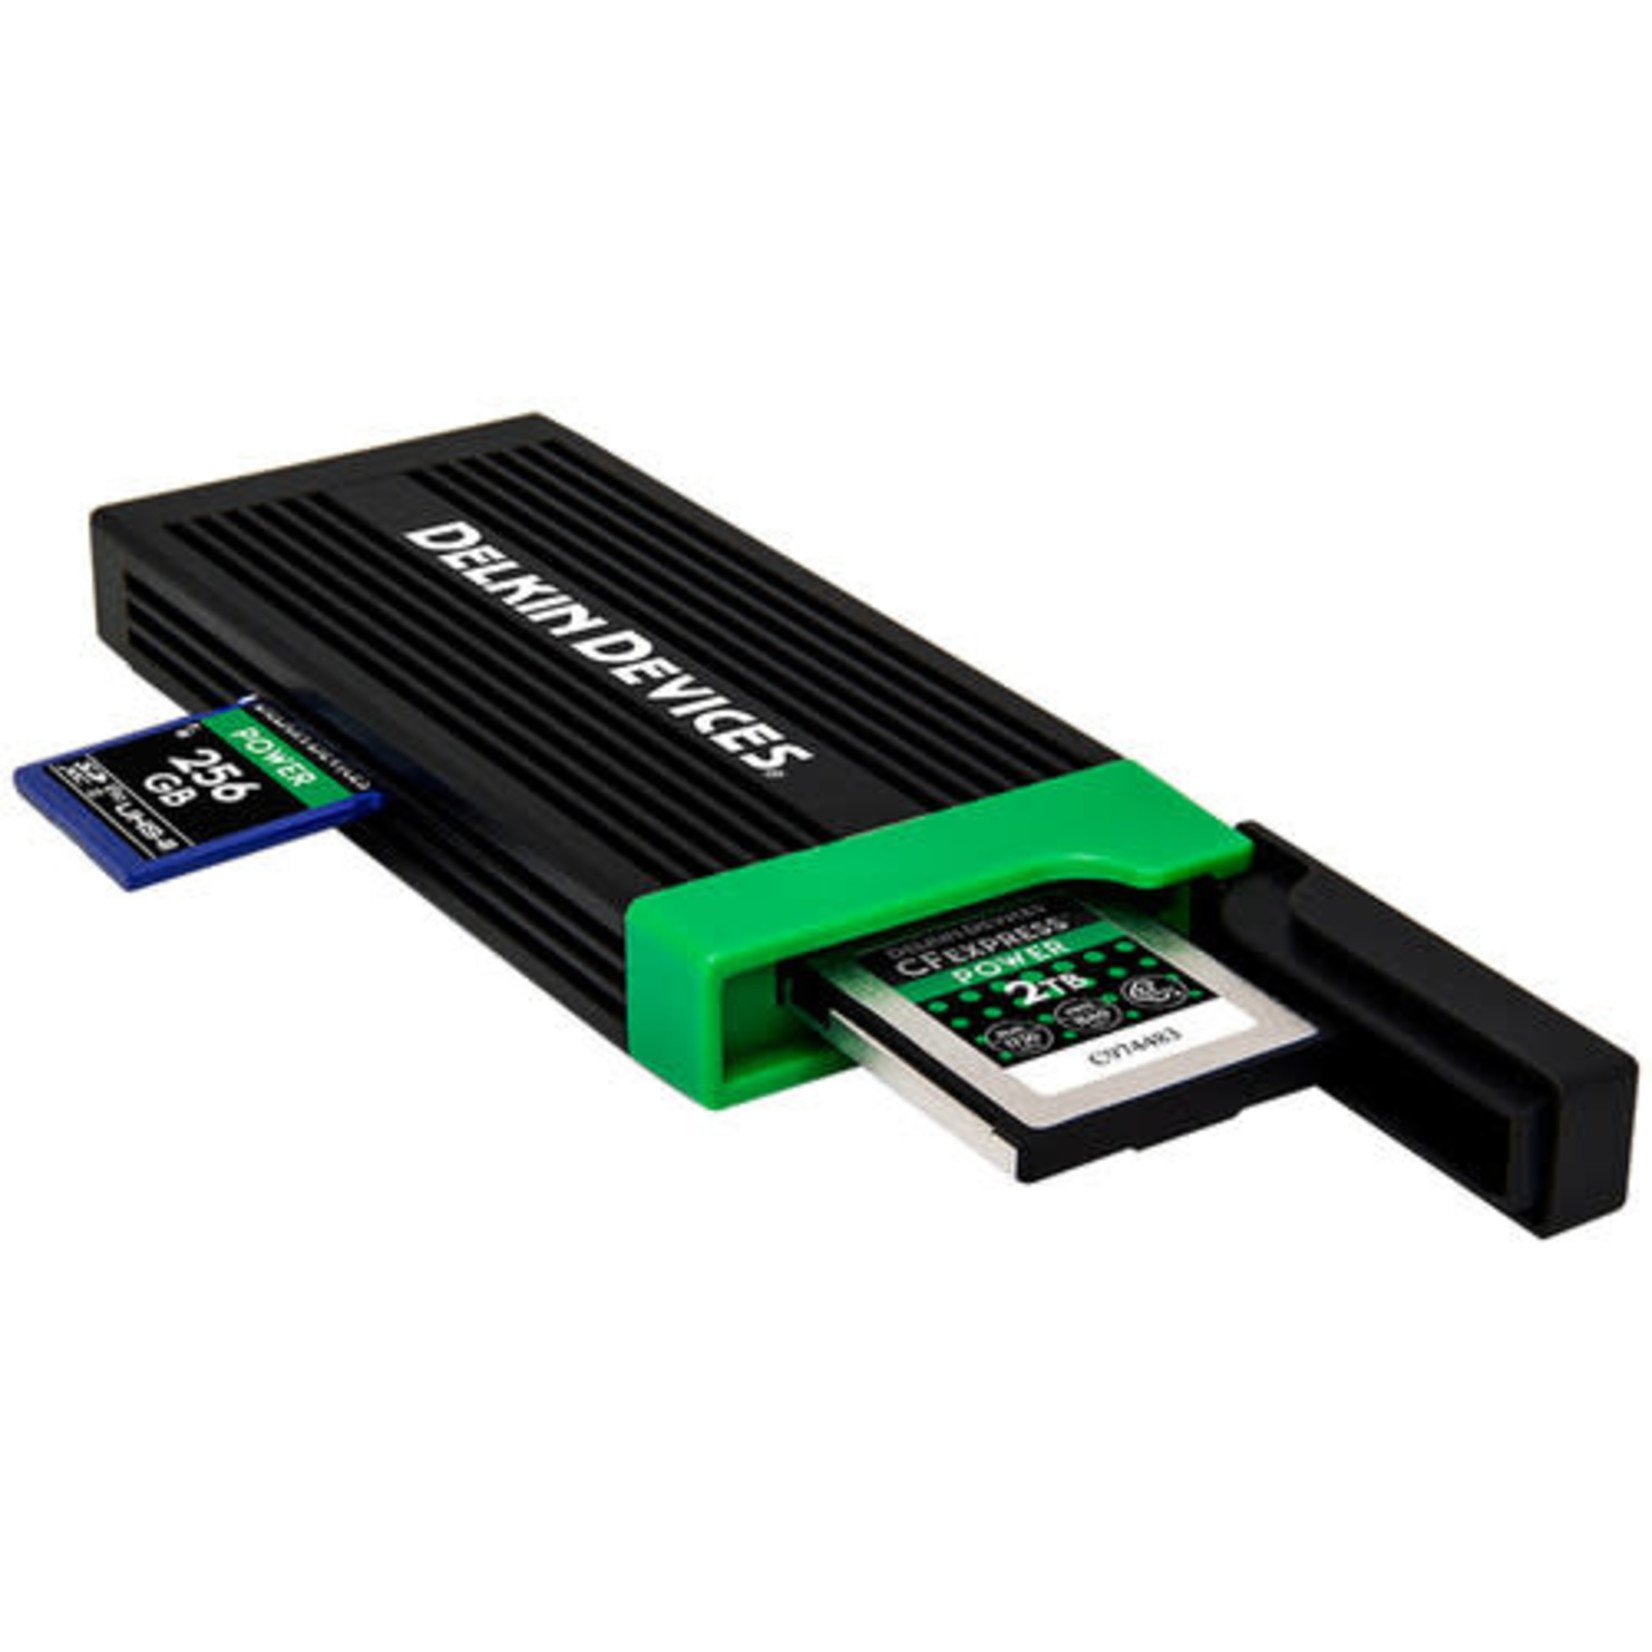 Delkin Delkin Devices USB 3.2 CFexpress Type B Card and SD UHS-II Memory Card Reader